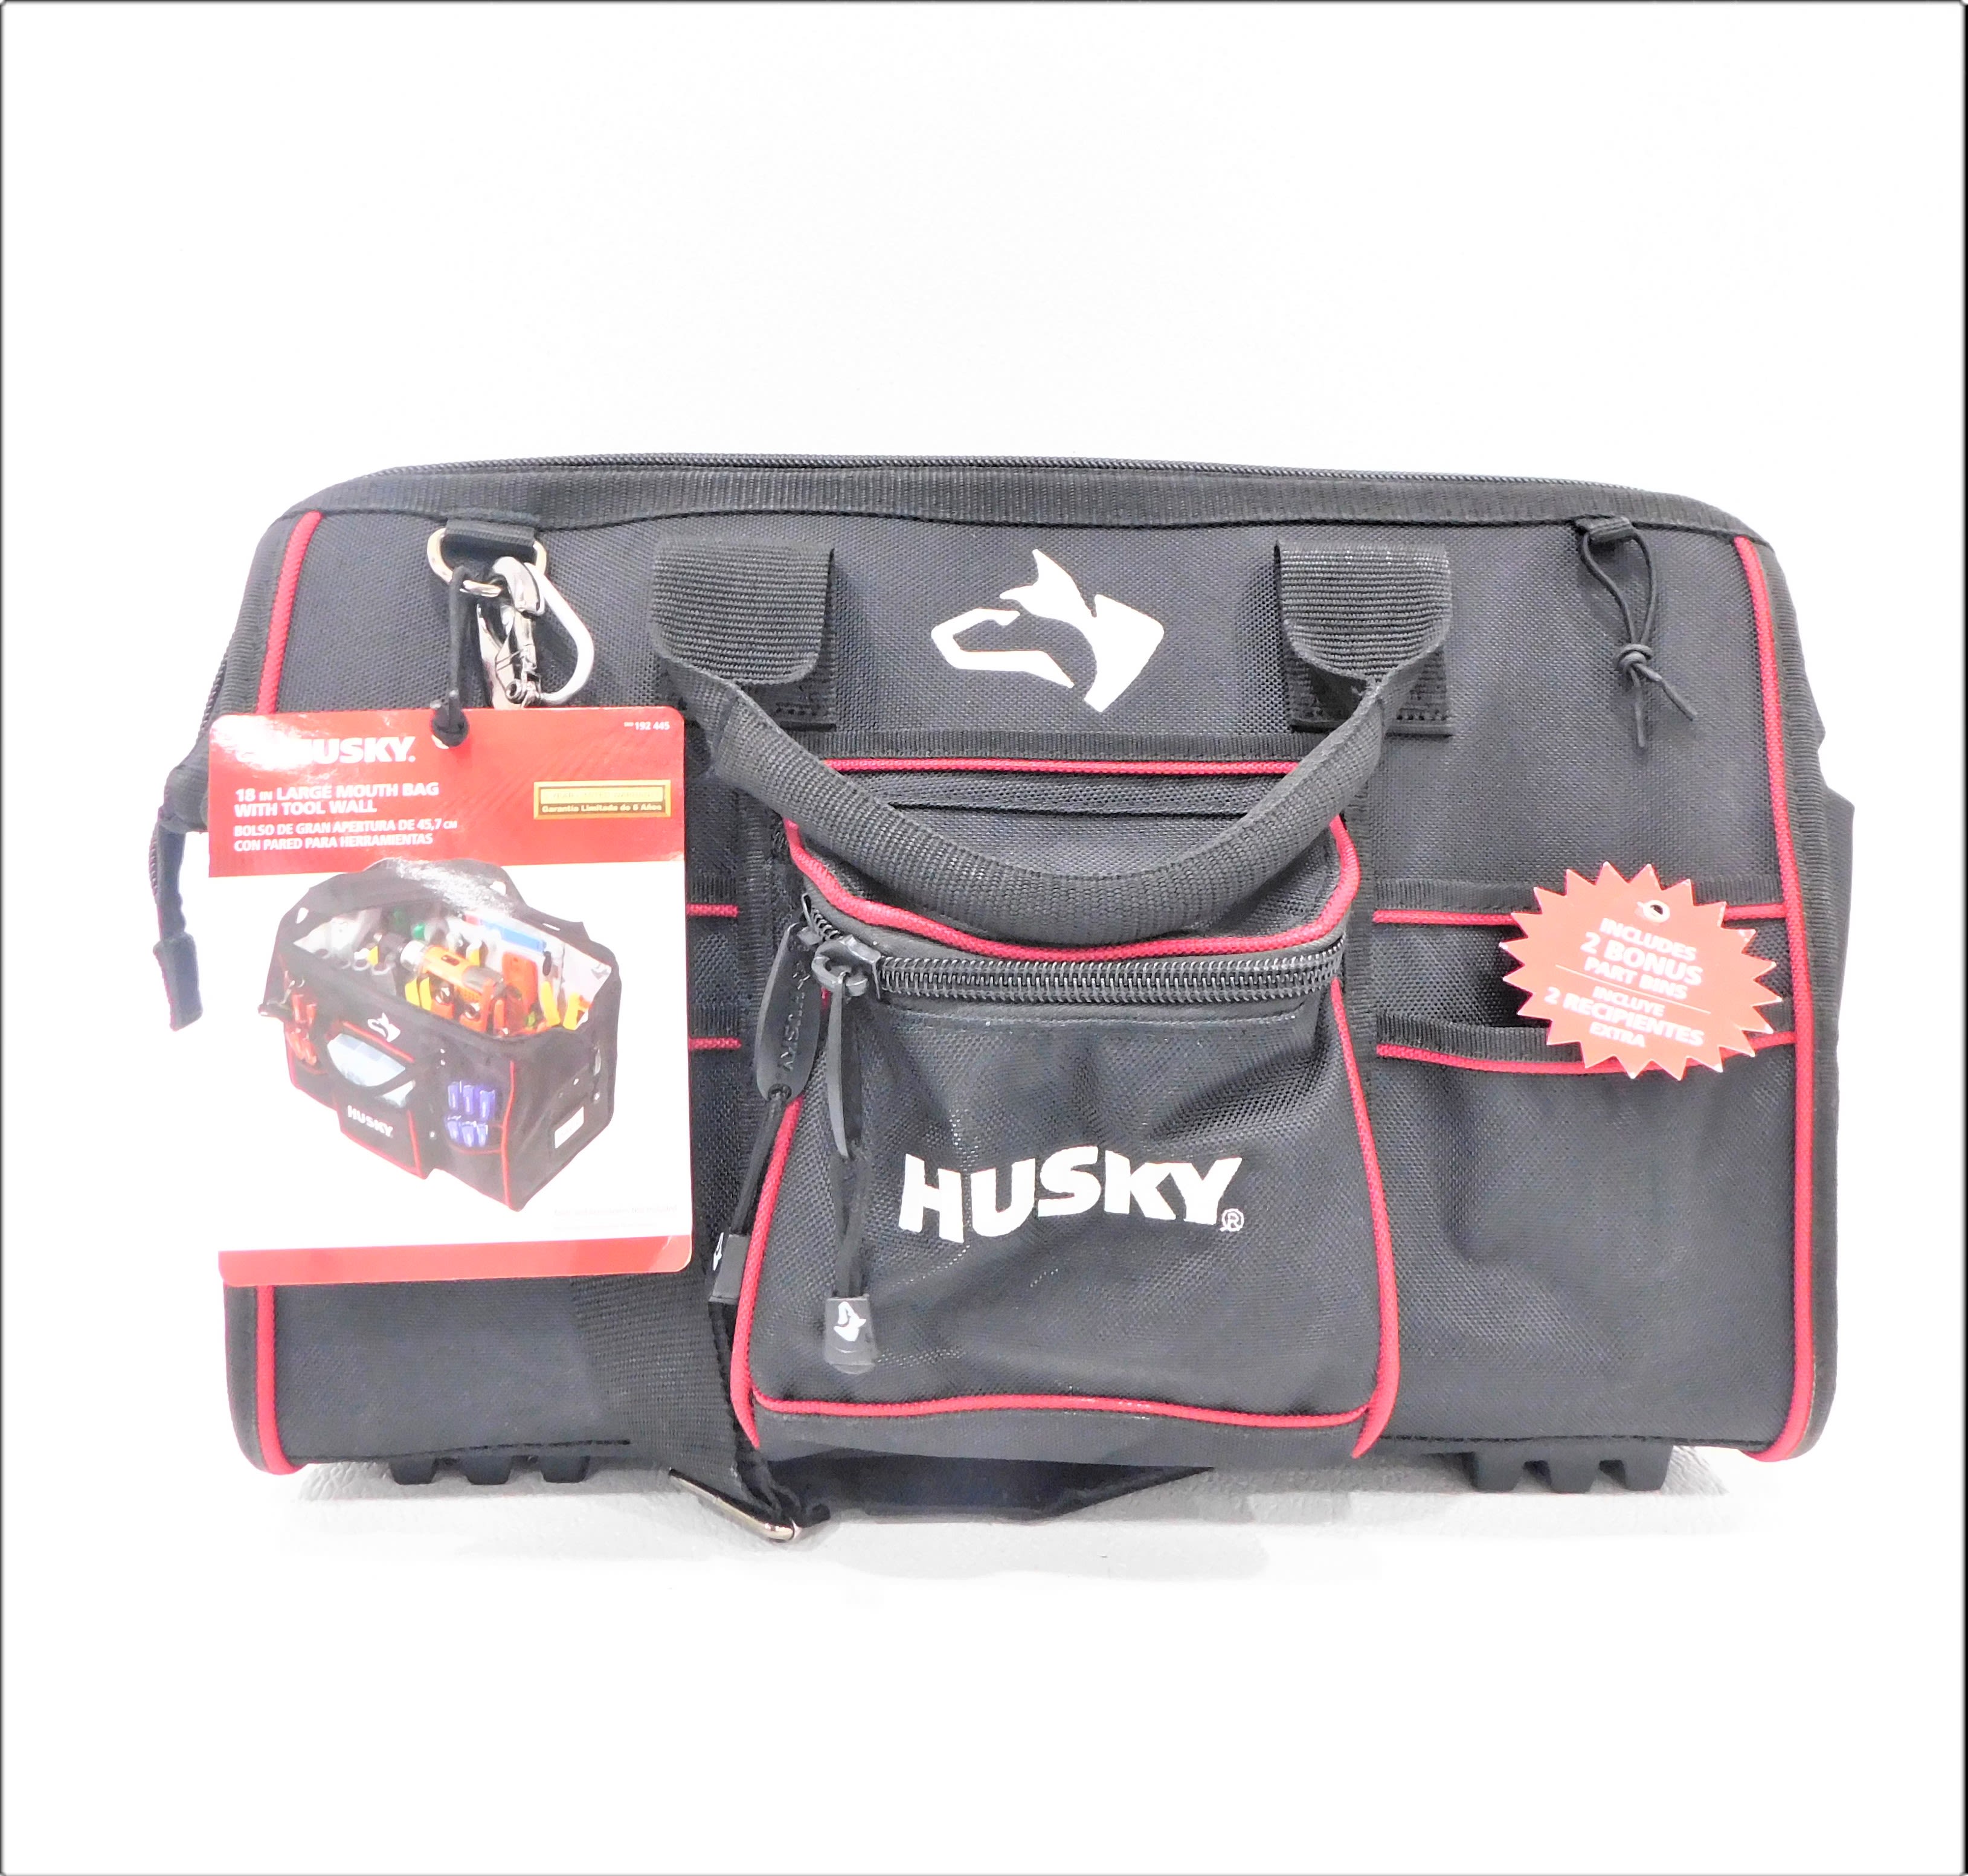 4) BOXES OF HUSKY CONTRACTOR BAGS - Earl's Auction Company